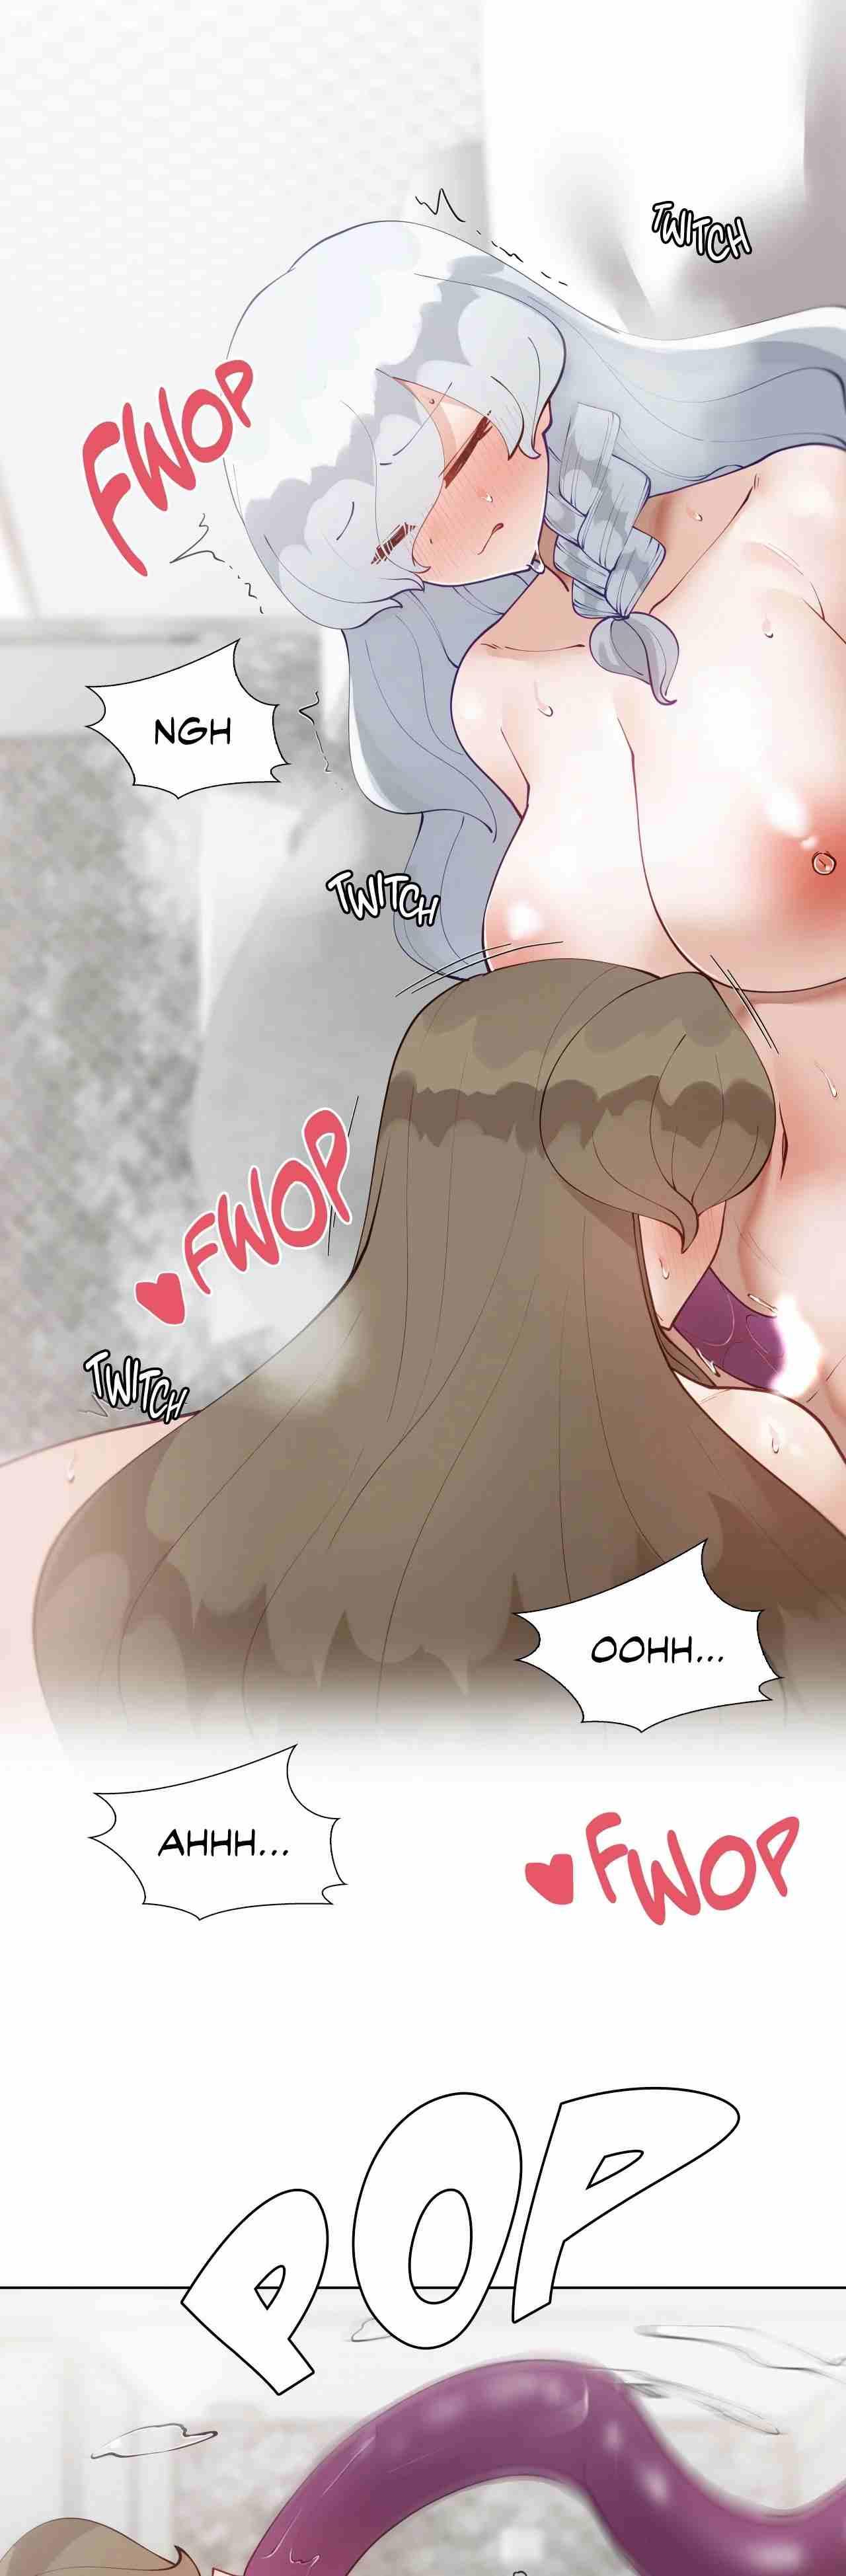 [Over.J, Choi Tae-young] Learning the Hard Way 2nd Season (After Story) Ch.3/? [English] [Manhwa PDF] Ongoing 73